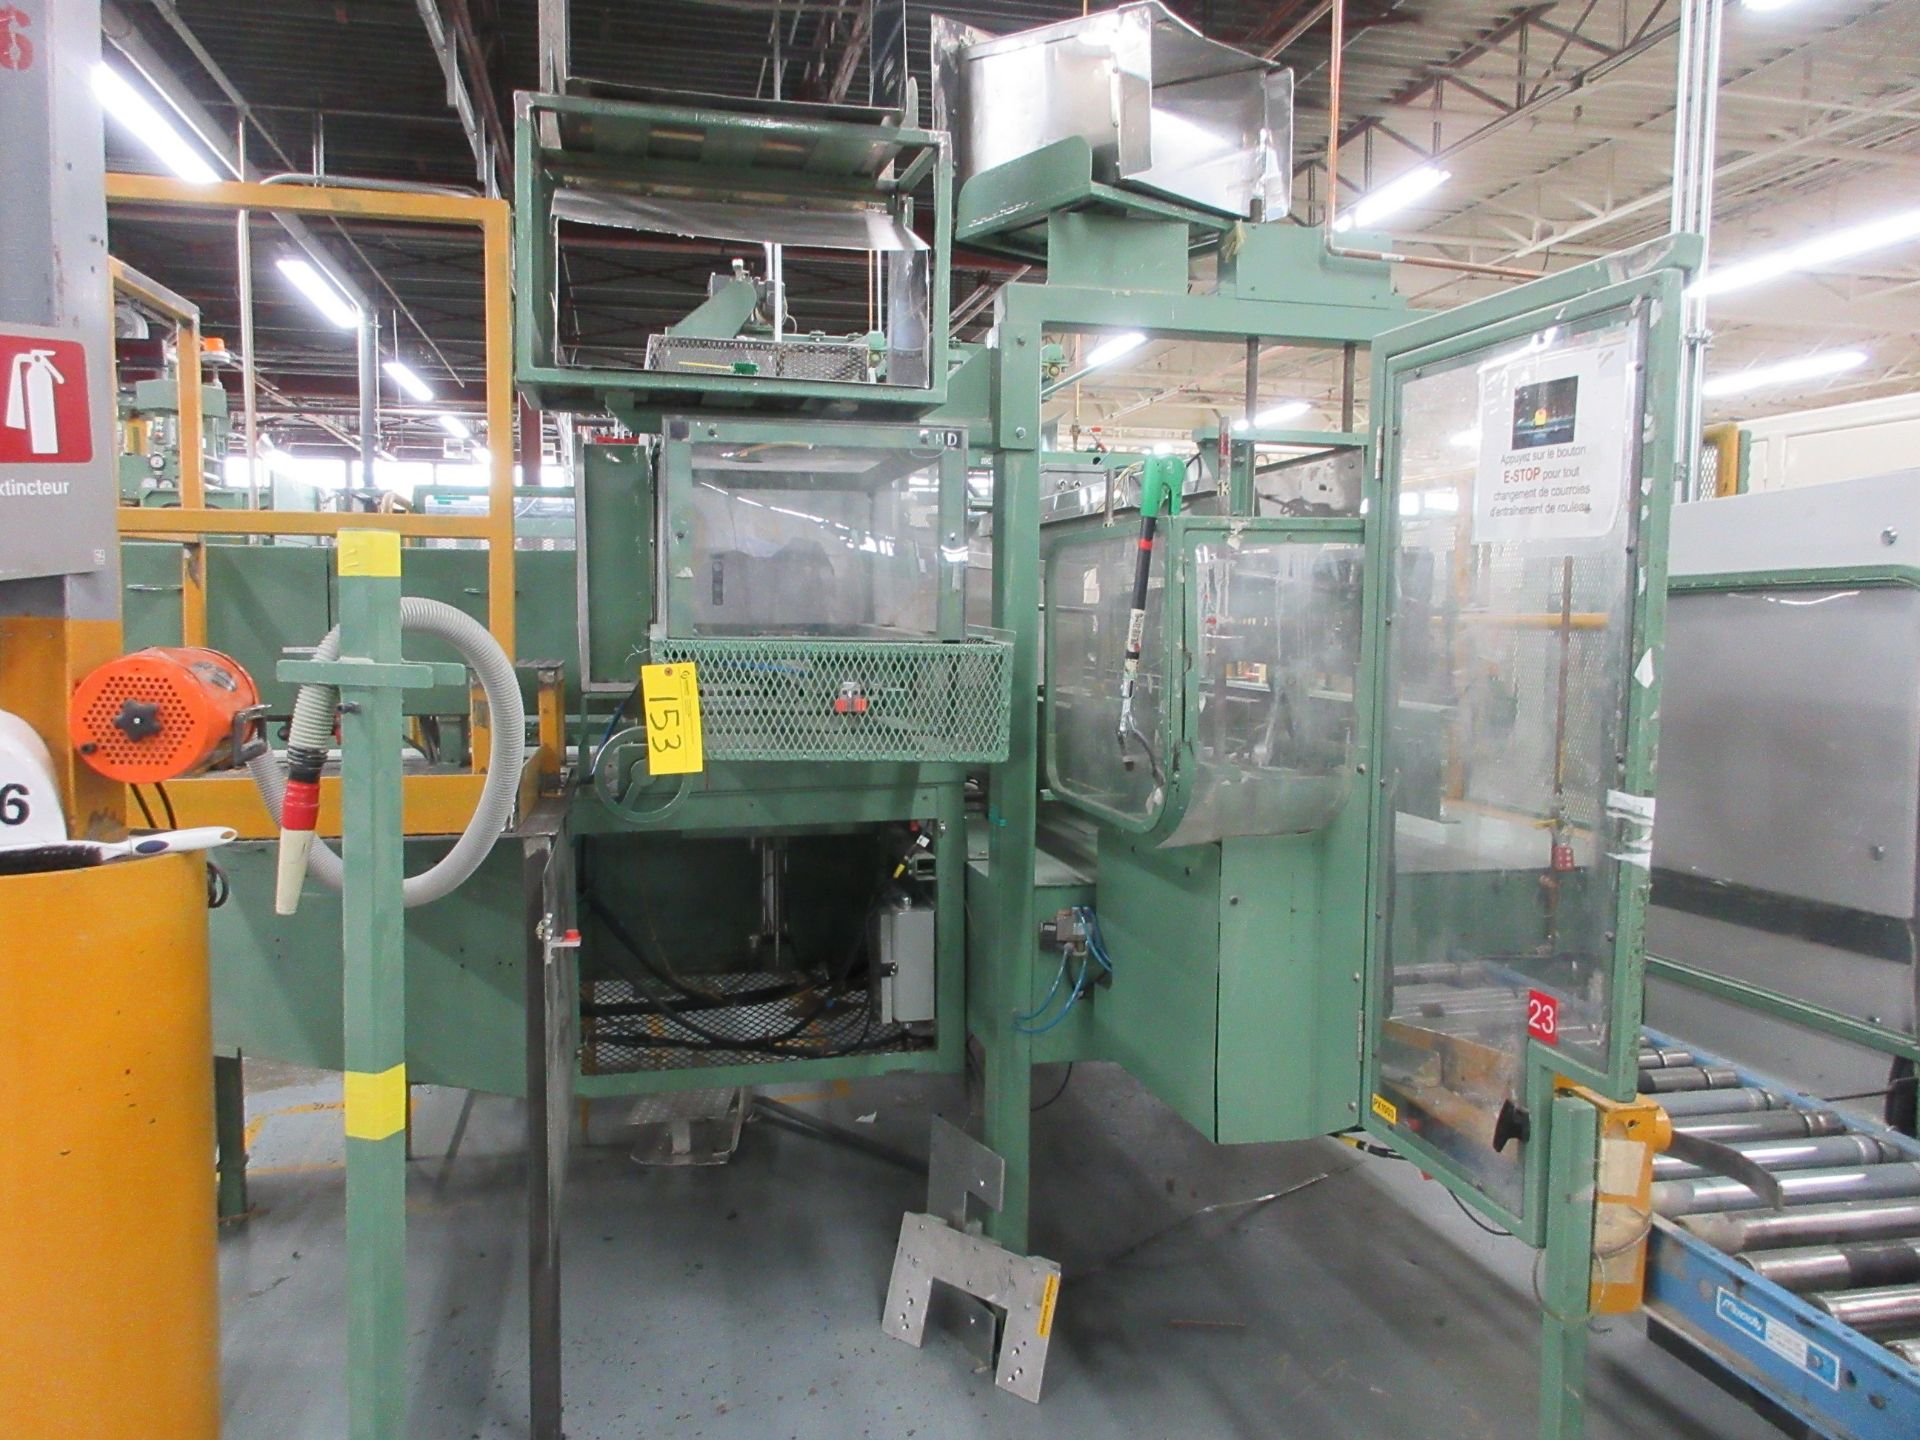 EDSON 1600 CASE PACKER, (1) INFEED LANE, AUTOMATIC MAGAZINE FEEDER, 5CS/MIN MAX CYCLE SPEED, SLC-501